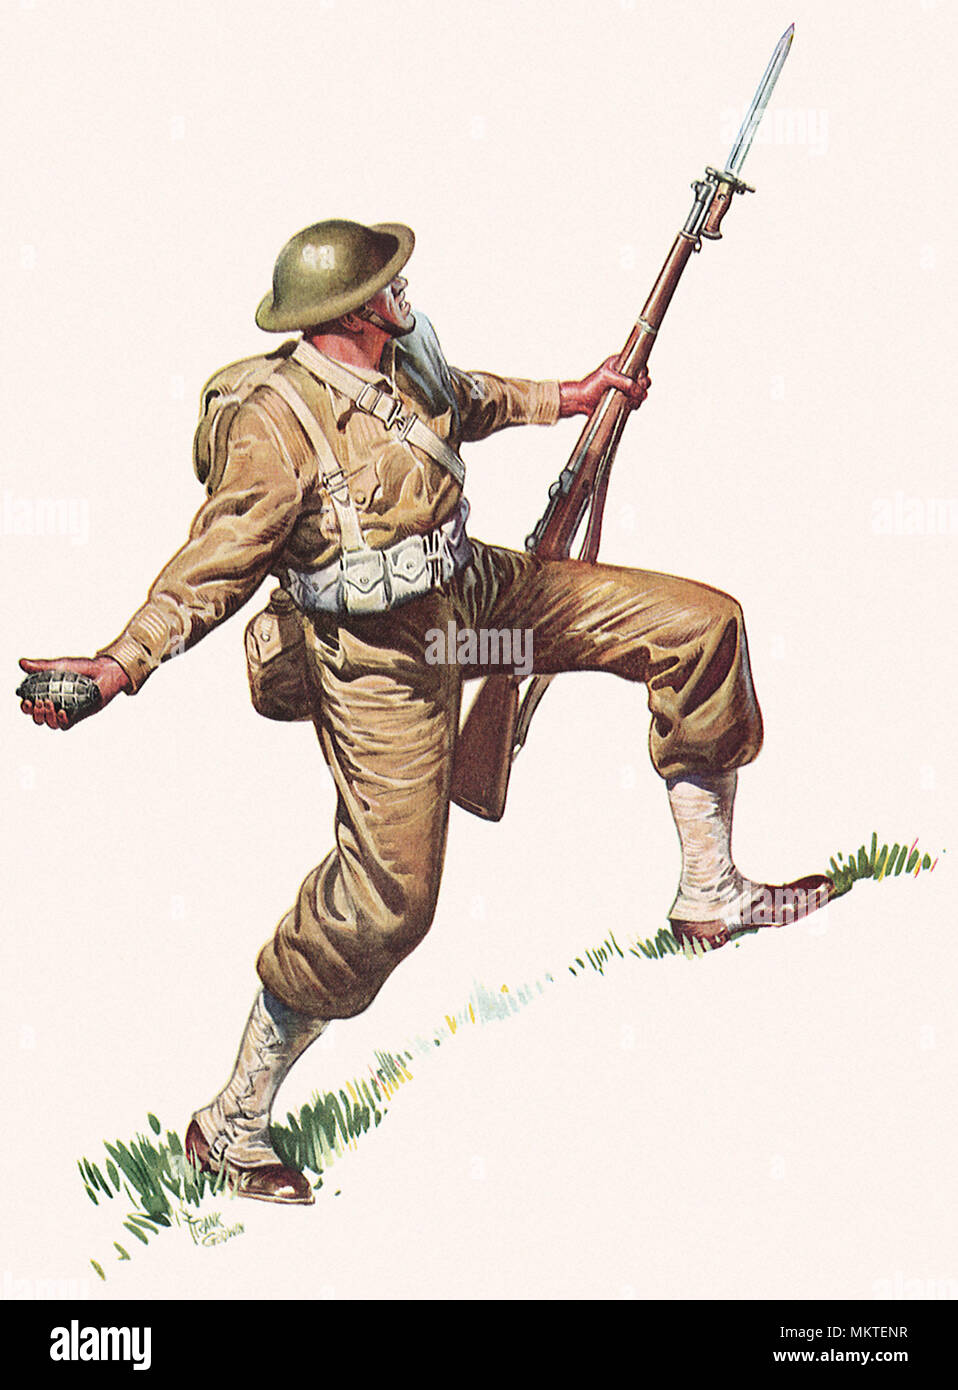 Soldier with Rifle lobs Grenade Stock Photo